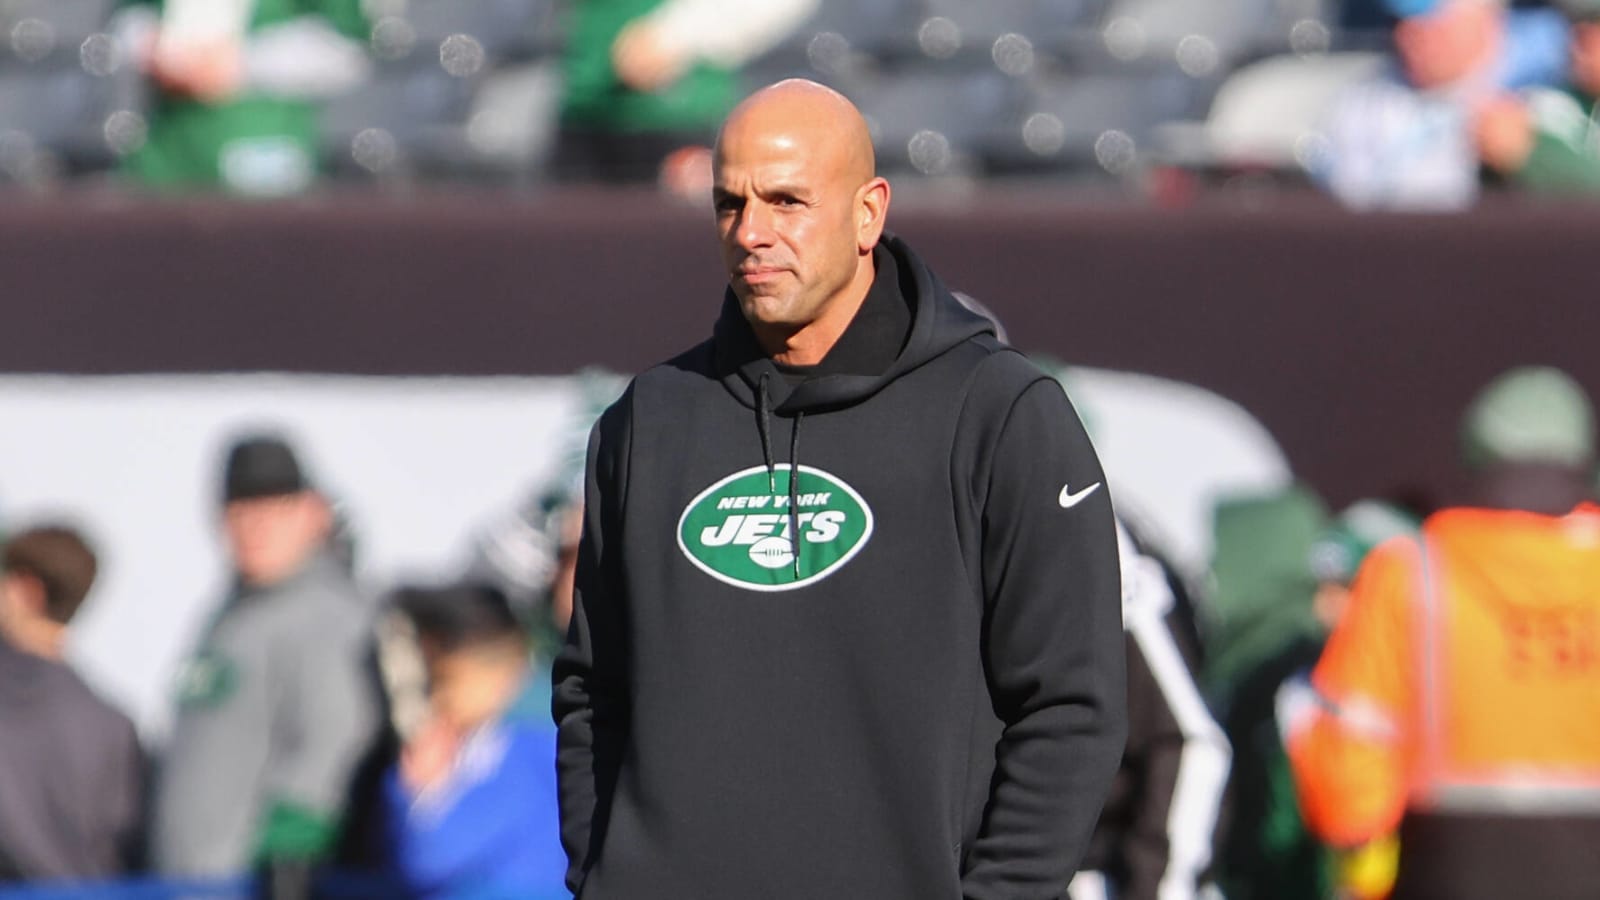 Jets HC Robert Saleh blew it late against Lions by not using timeout